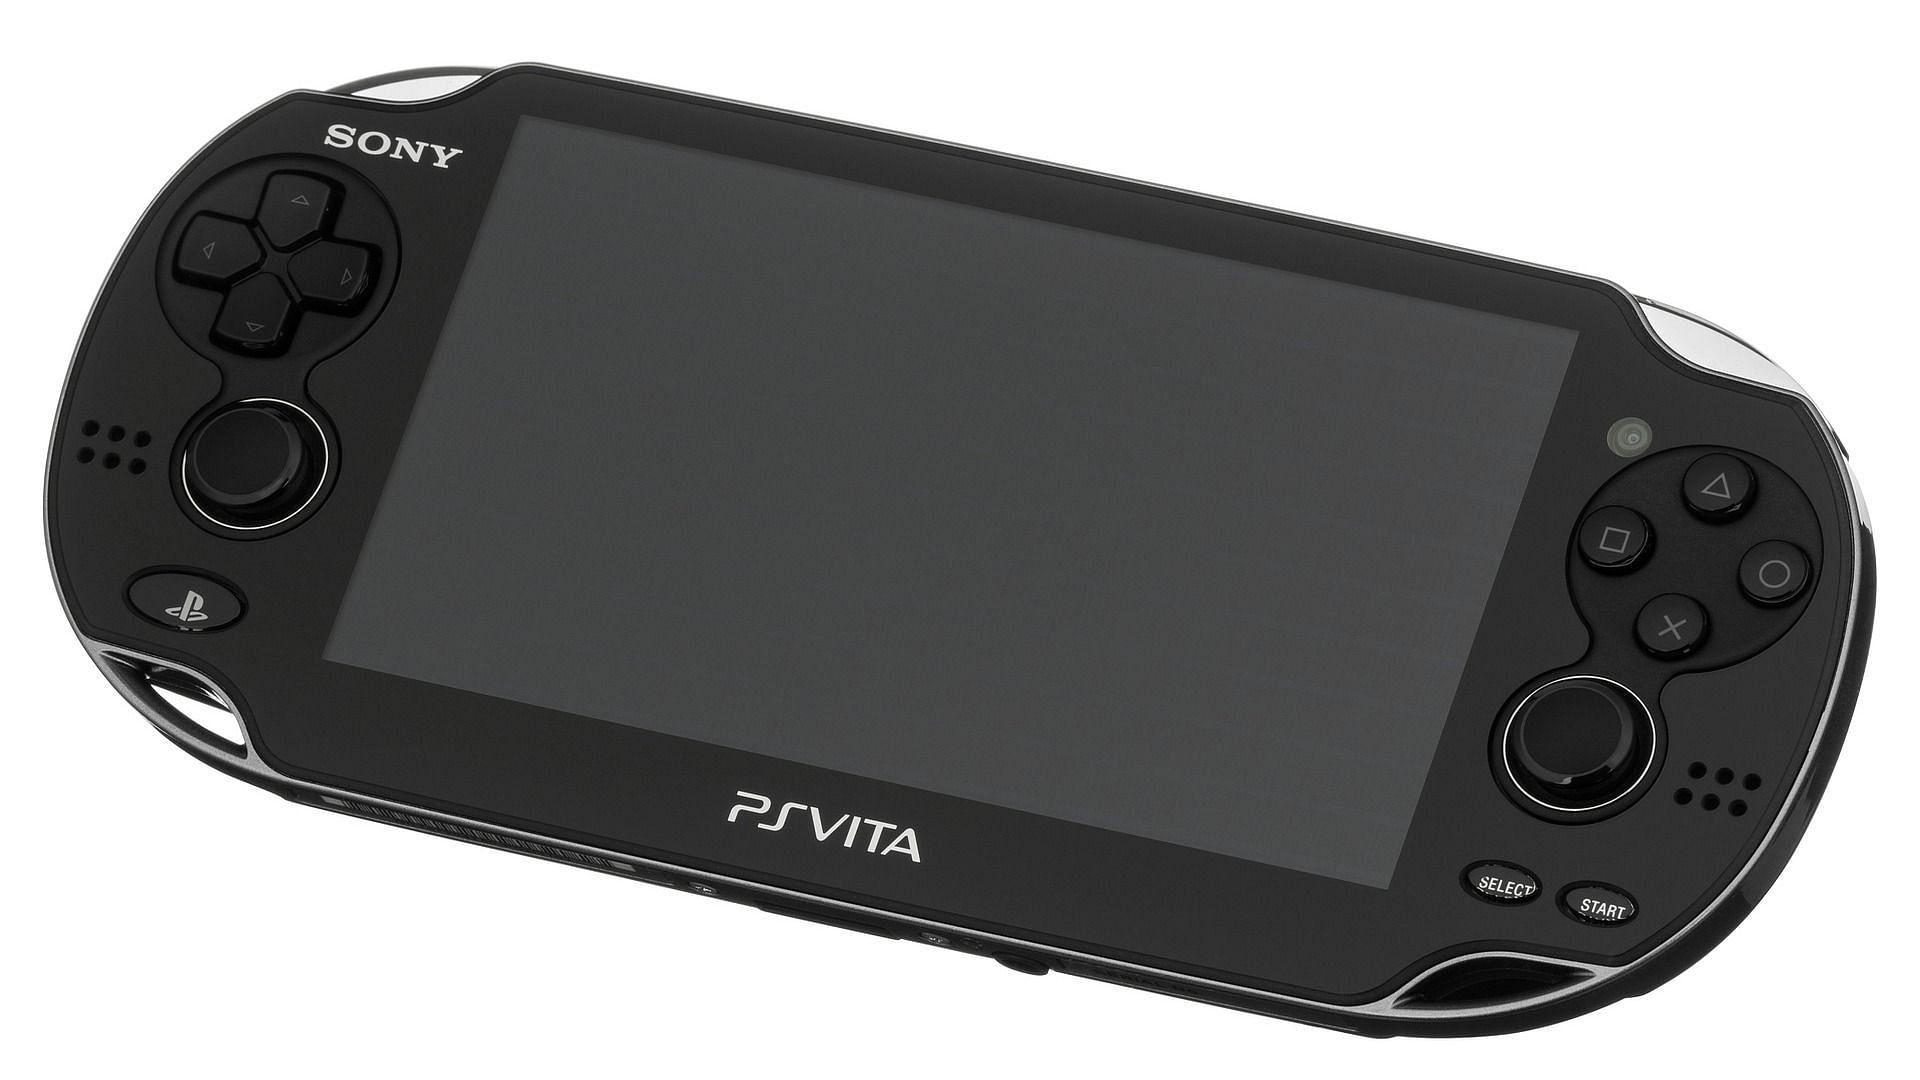 The PlayStation Vita was one of the most technologically advanced handheld gaming consoles (Image by WikimediaImages from Pixabay)